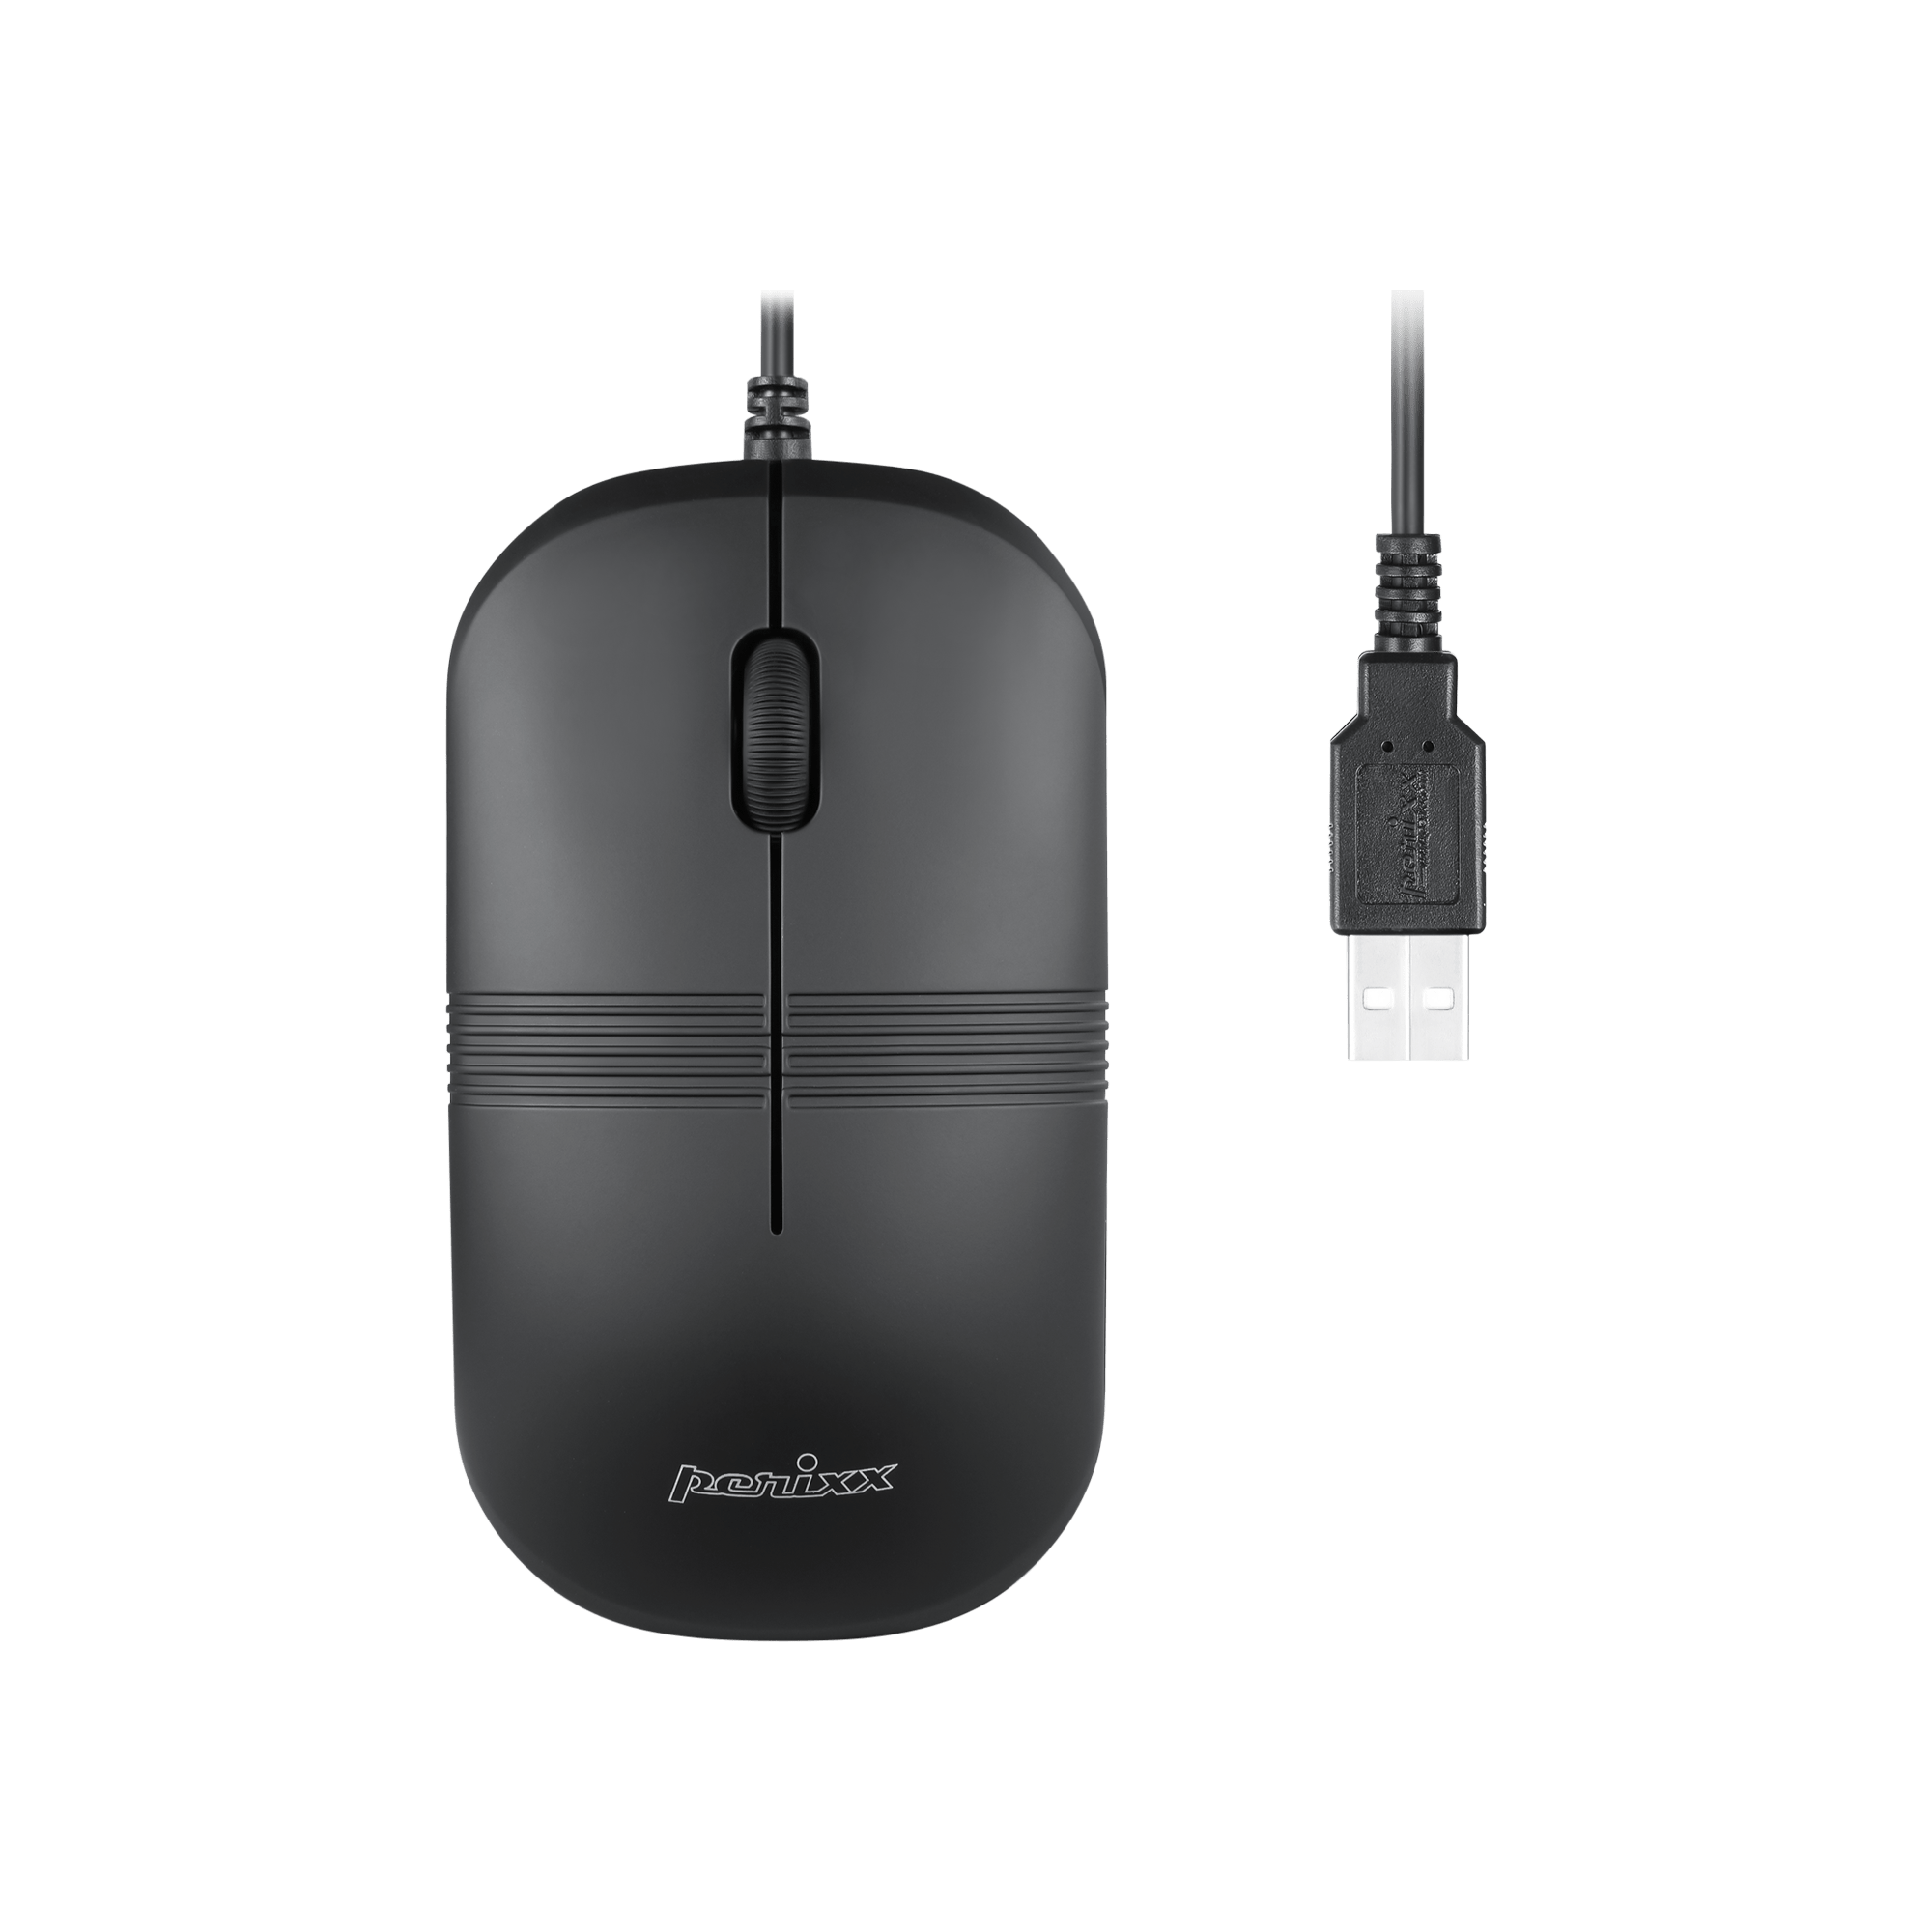 PERIMICE-503 B - Wired Waterproof Mouse - Perixx Europe